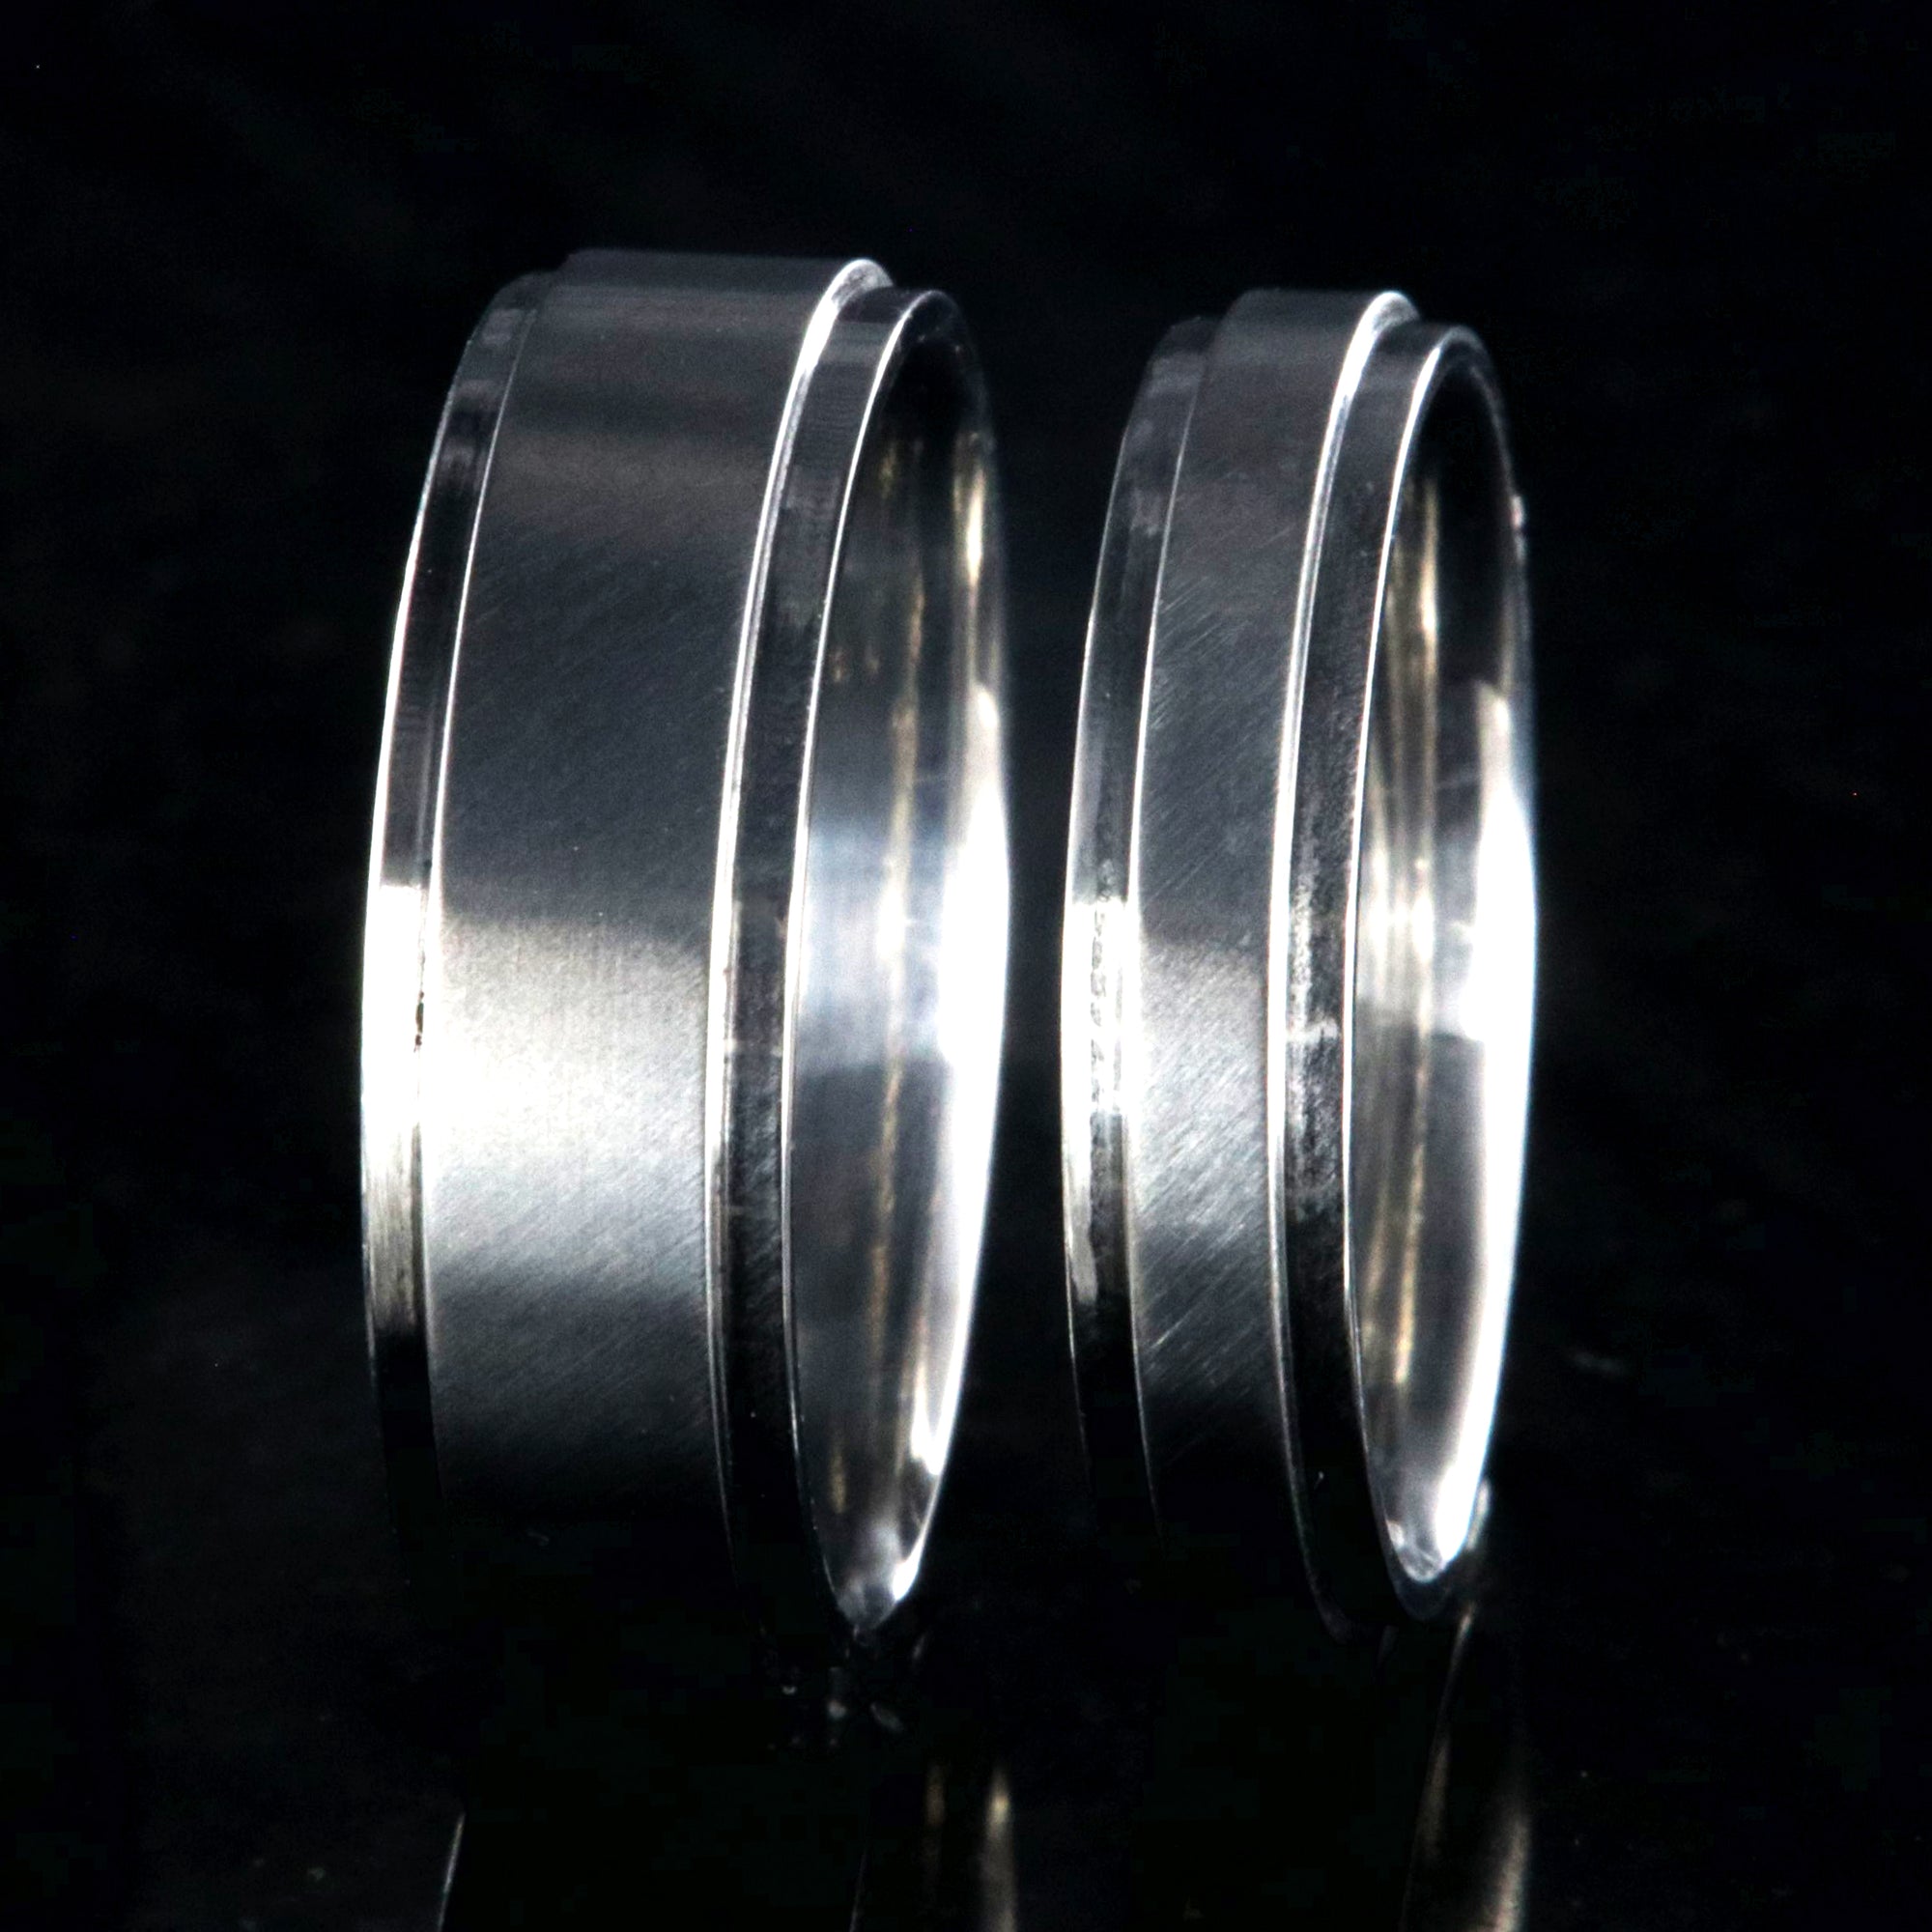 6mm and 4mm wide matching titanium wedding bands with raised centers